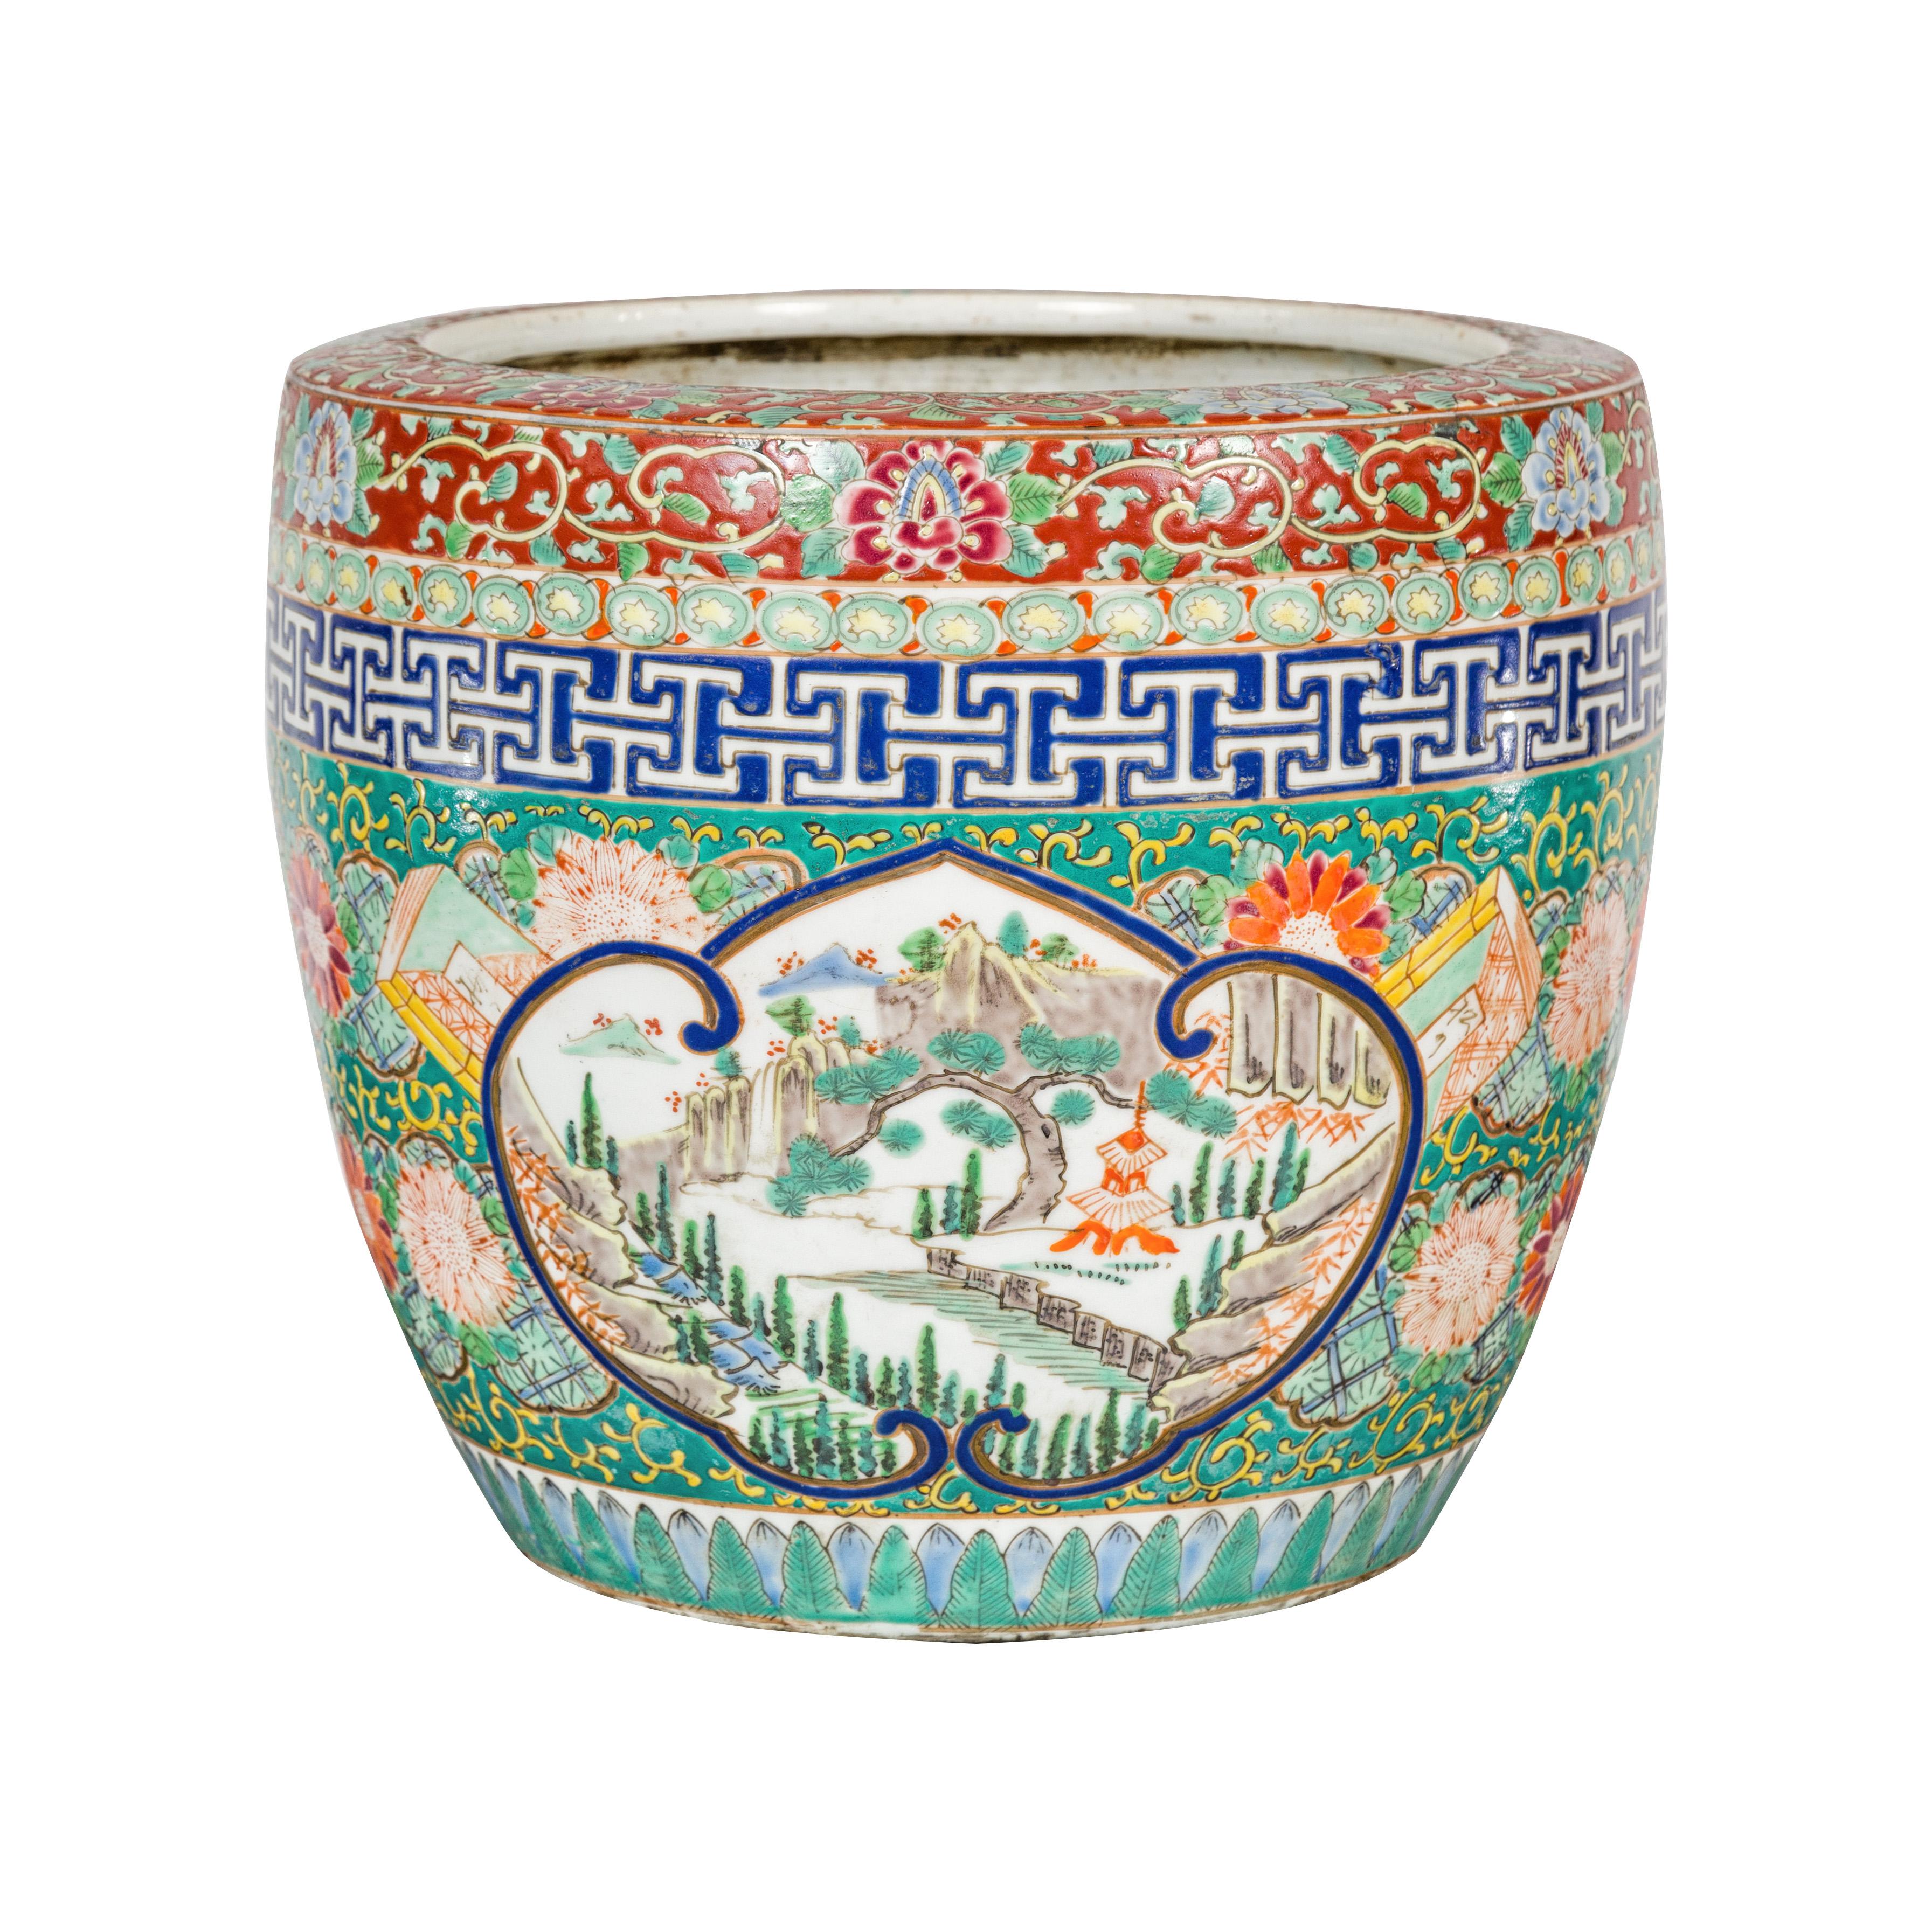 Japanese Hand-Painted Imari Planter with Landscape, Tree, Flowers and Books For Sale 11